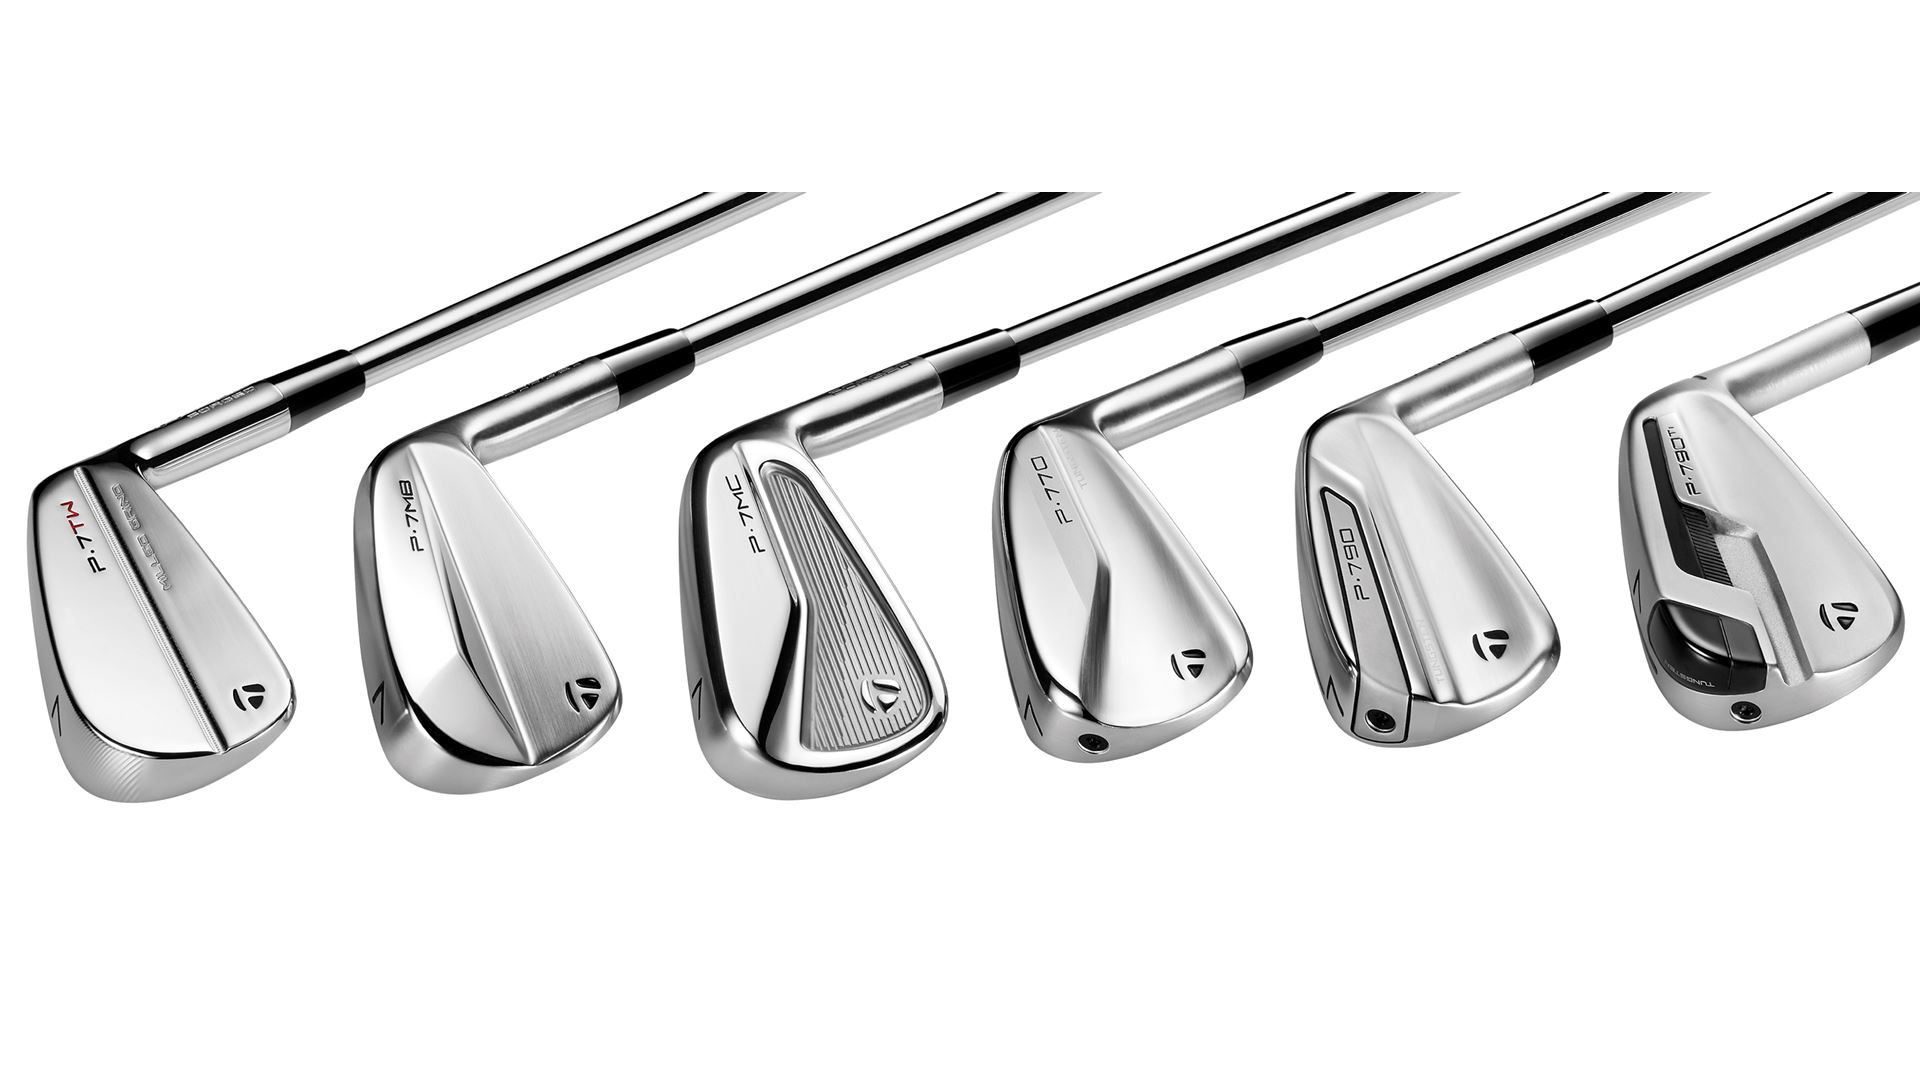 TaylorMade Golf Adds To The Series of P•700 Irons With The All-New P•7MB, P•7MC and P•770 Irons